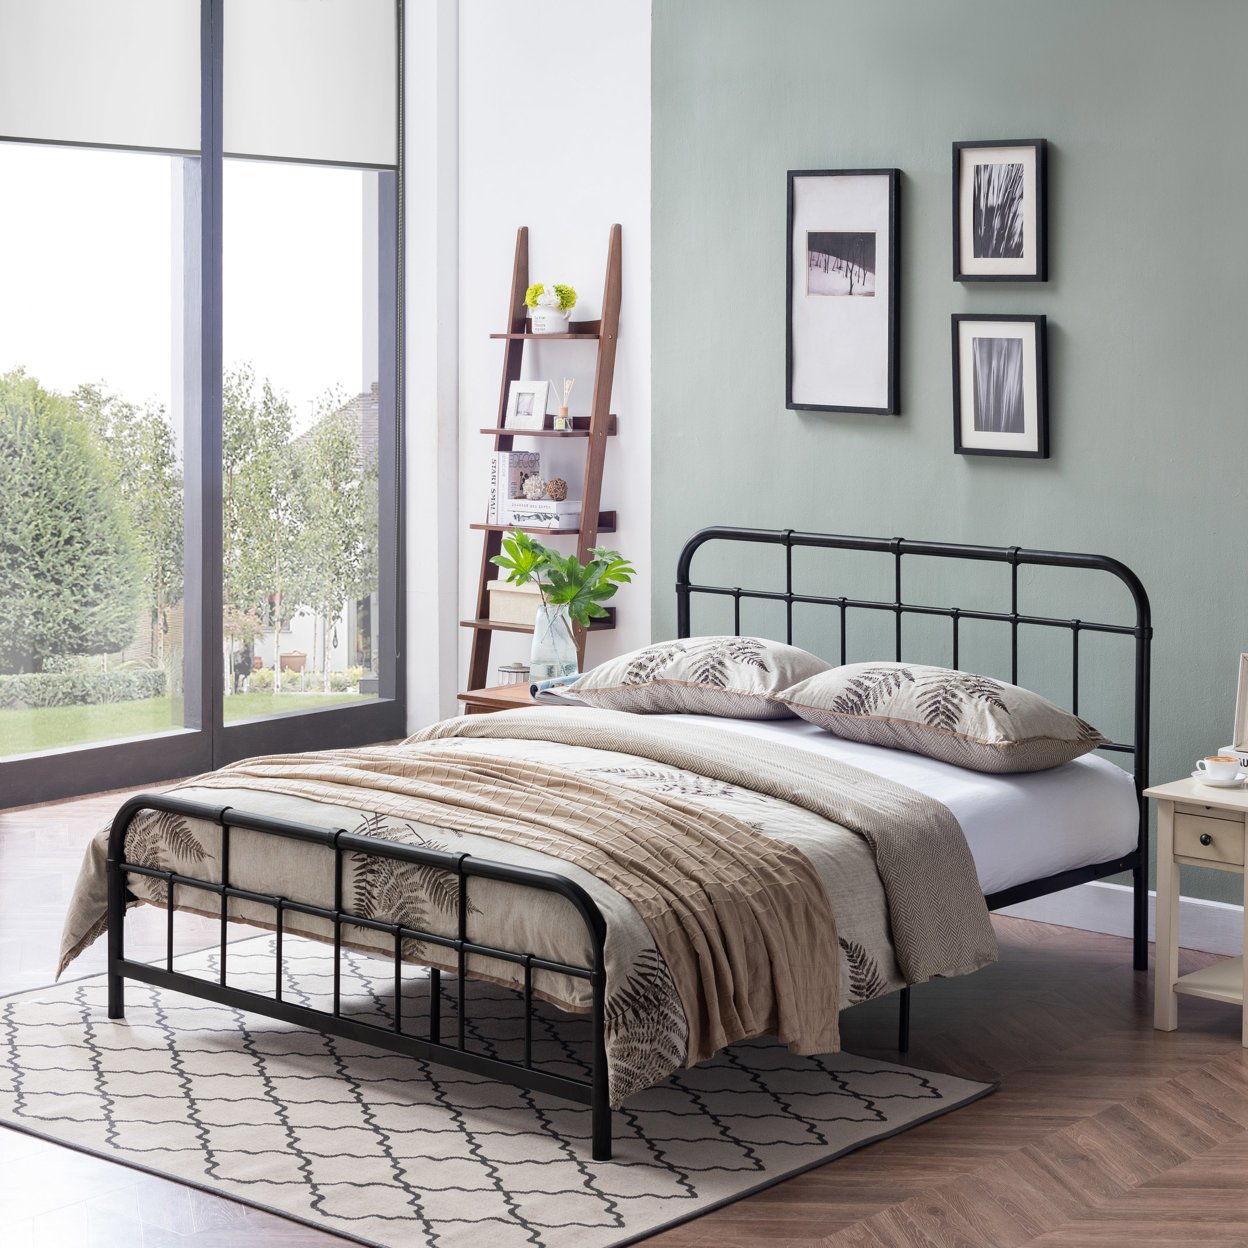 Sylvia Queen-Size Iron Bed Frame, Minimal, Industrial - Charcoal Gray